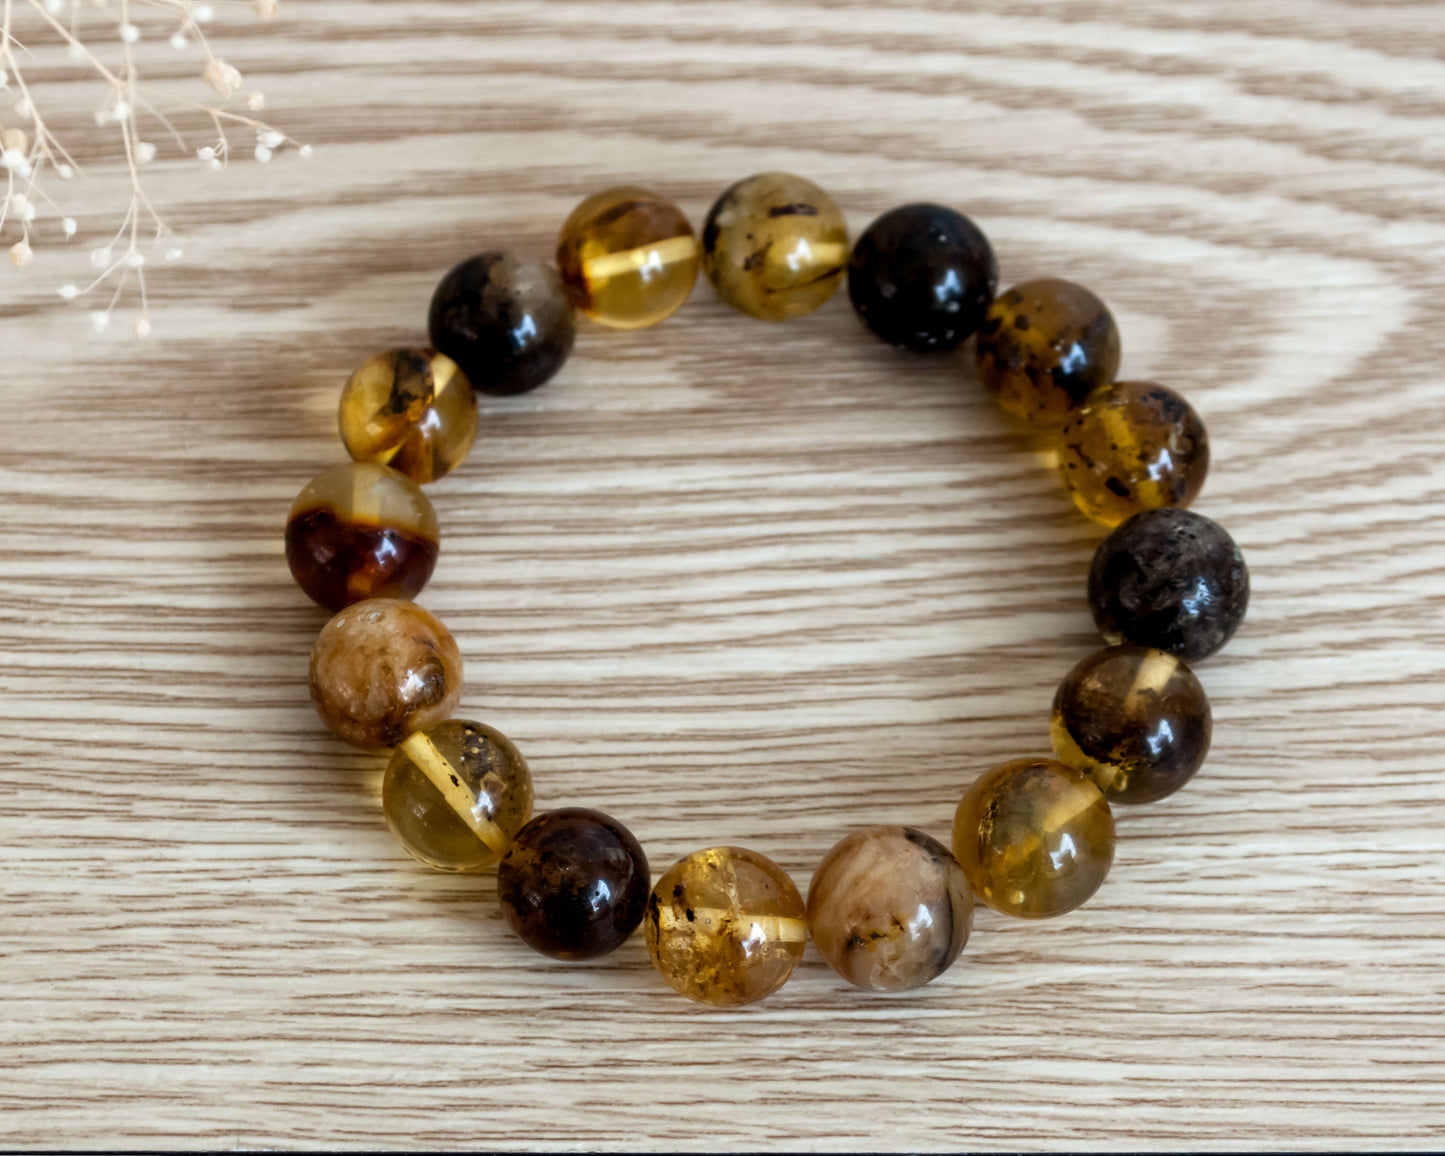 Handmade Cognac Color Charm Bracelet with Round Shape Natural Baltic Amber Gemstone Beads